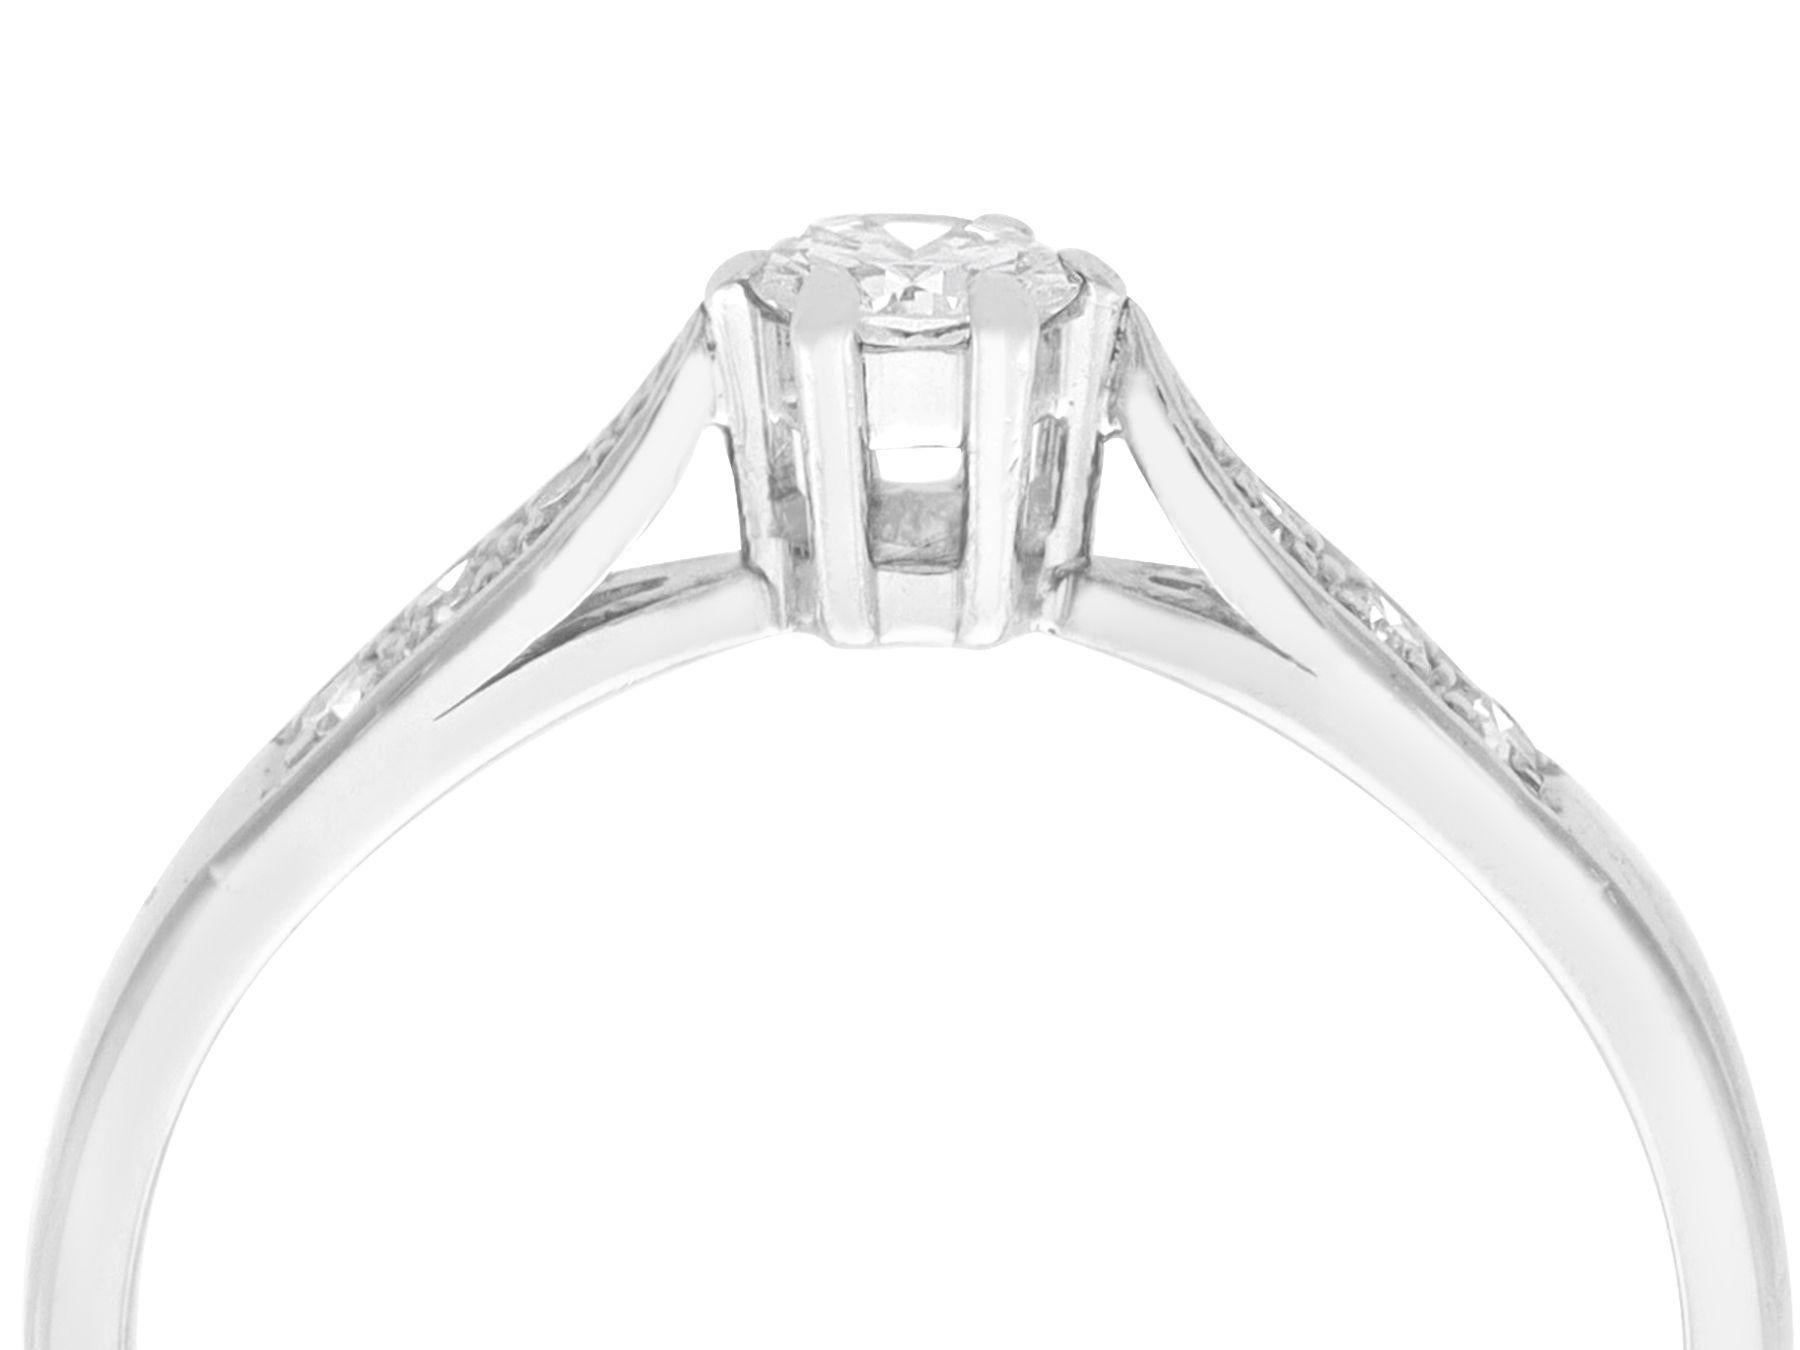 A fine and impressive 0.36 carat diamond and 18 karat white gold solitaire ring; part of our diamond jewelry/estate jewelry collections.

This impressive vintage solitaire diamond ring has been crafted in 18k white gold.

The pierced decorated